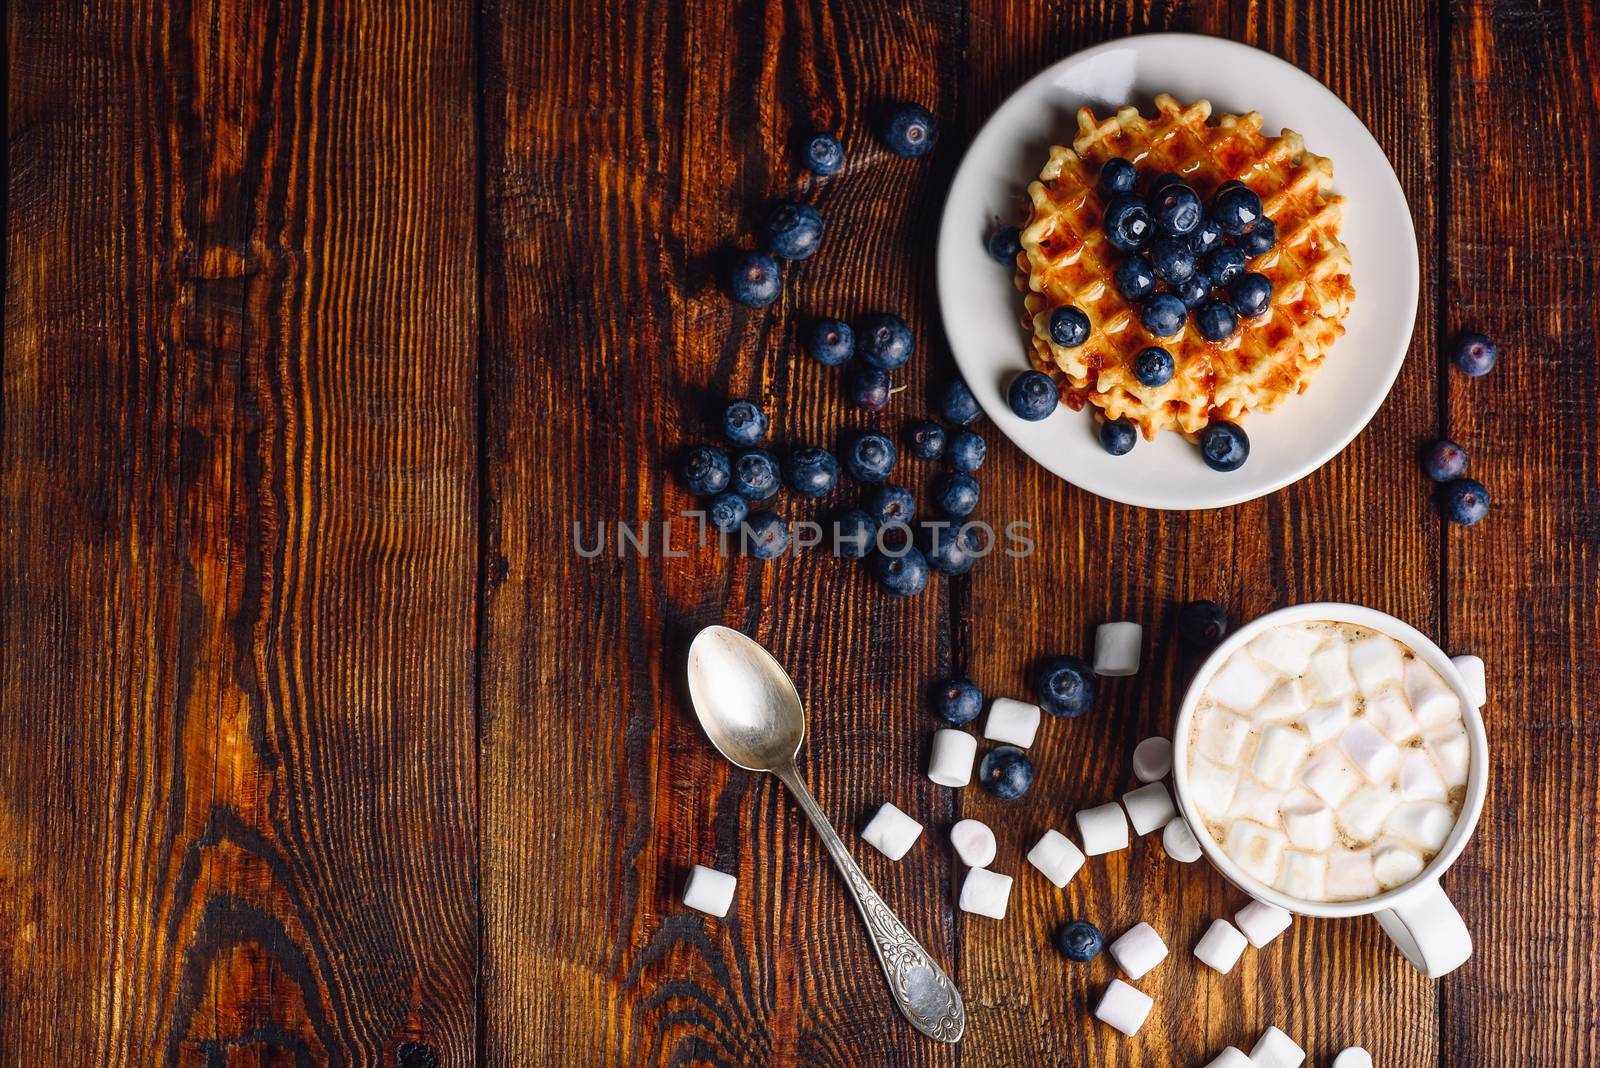 Cup of Hot Chocolate with Marshmallow and Homemade Waffles with Fresh Blueberry and Topping on Plate. Copy Space on the Left. Veiw from Above.